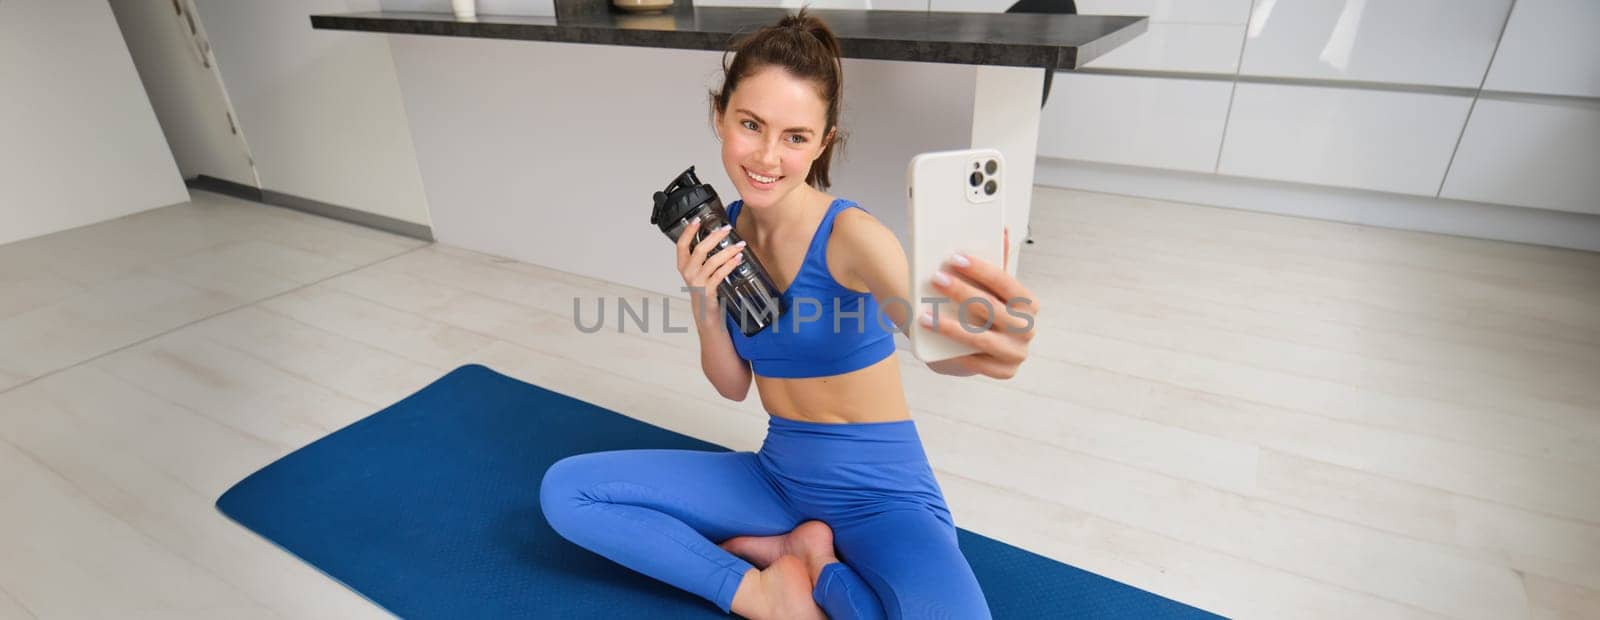 Portrait of woman doing sports, takes selfie on smartphone, fitness instructor records her exercises, stays hydrated, drinks water during training session by Benzoix